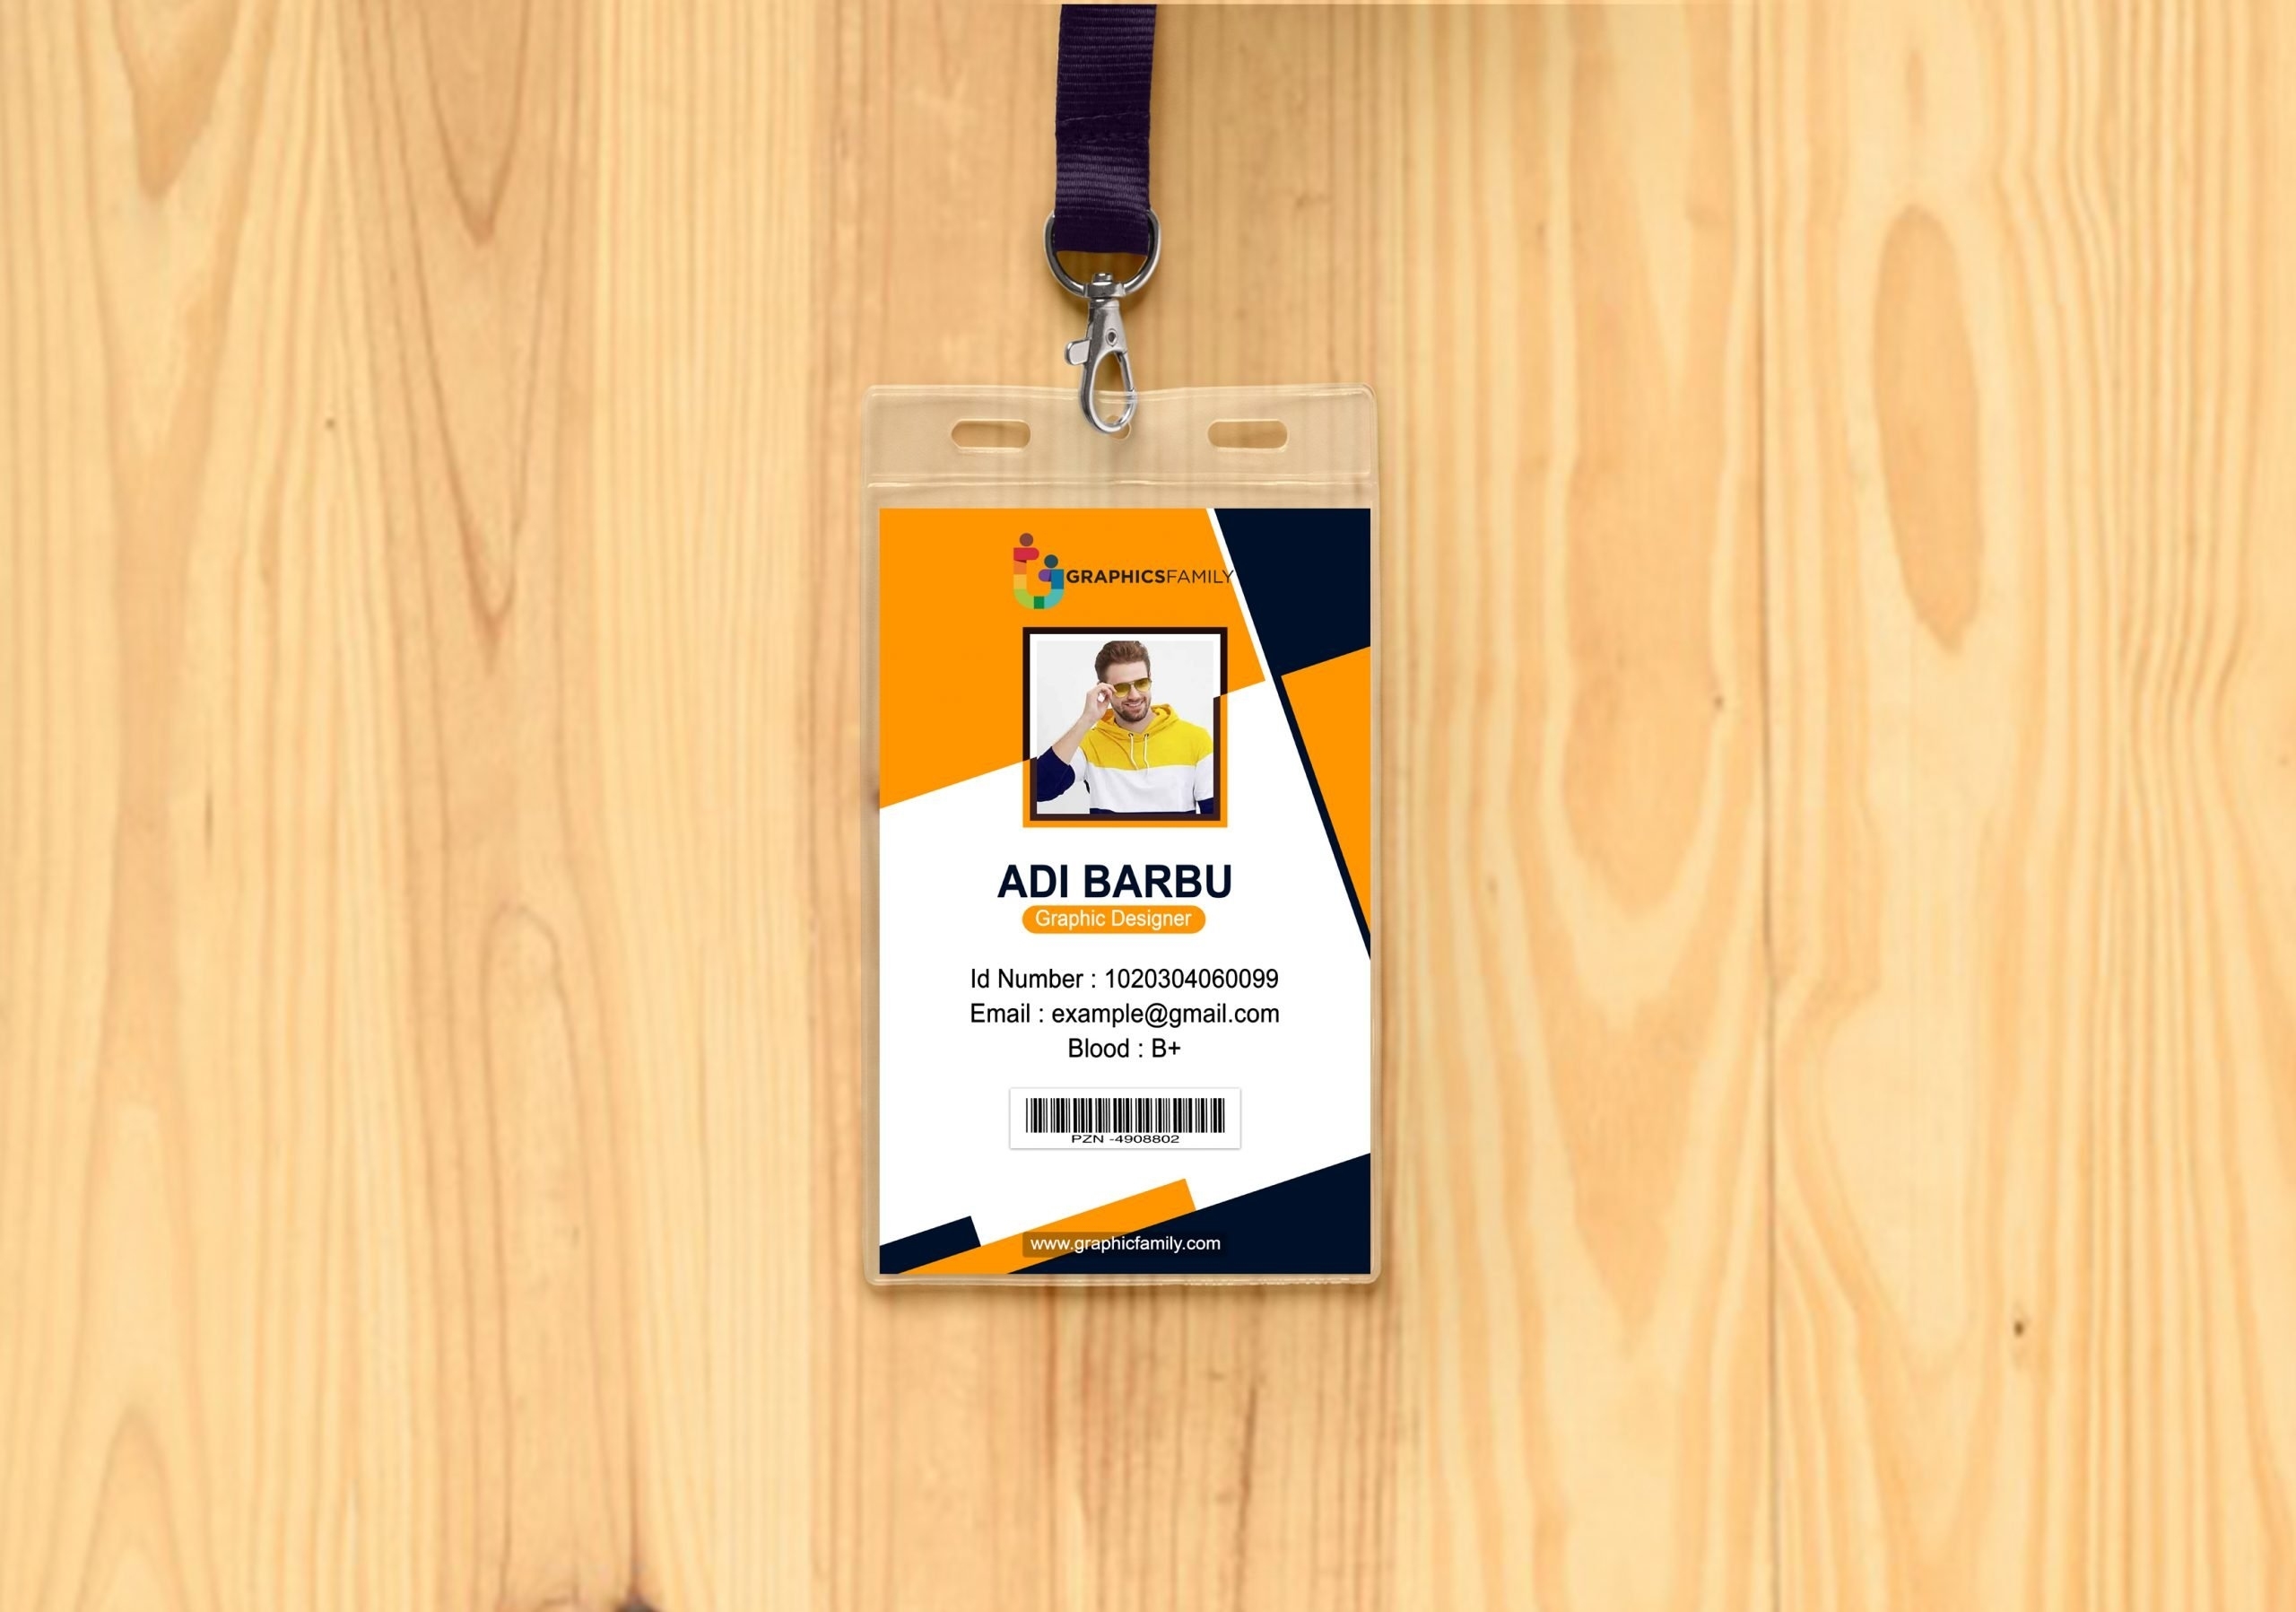 Best Employee Id Card Design Free Psd - Graphicsfamily with regard to Work Id Card Template